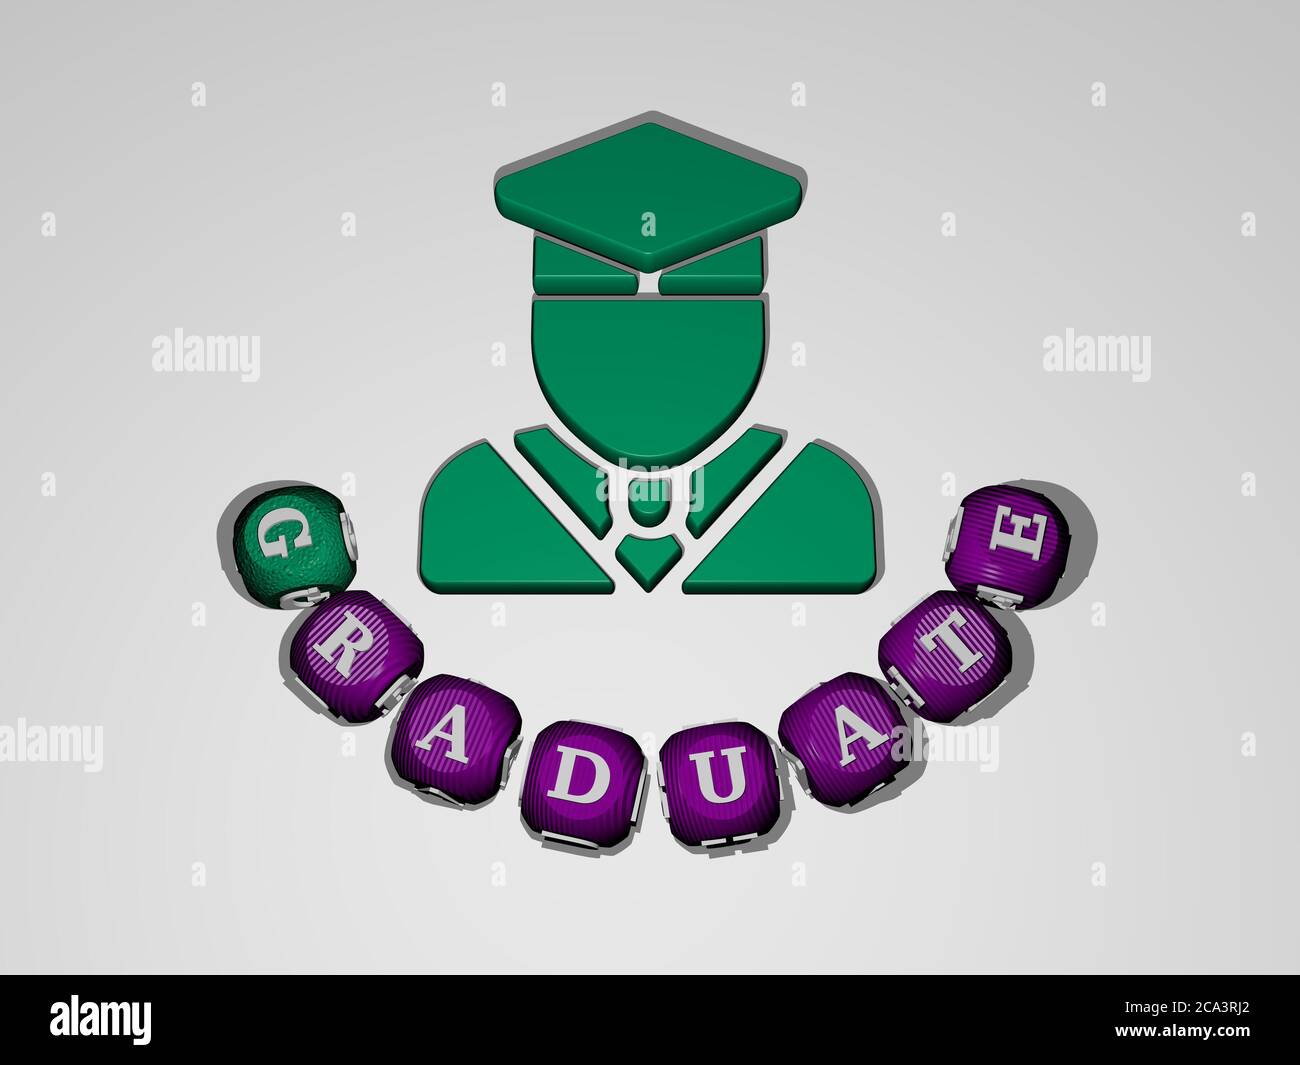 3D illustration of GRADUATE graphics and text around the icon made by metallic dice letters for the related meanings of the concept and presentations. education and graduation Stock Photo